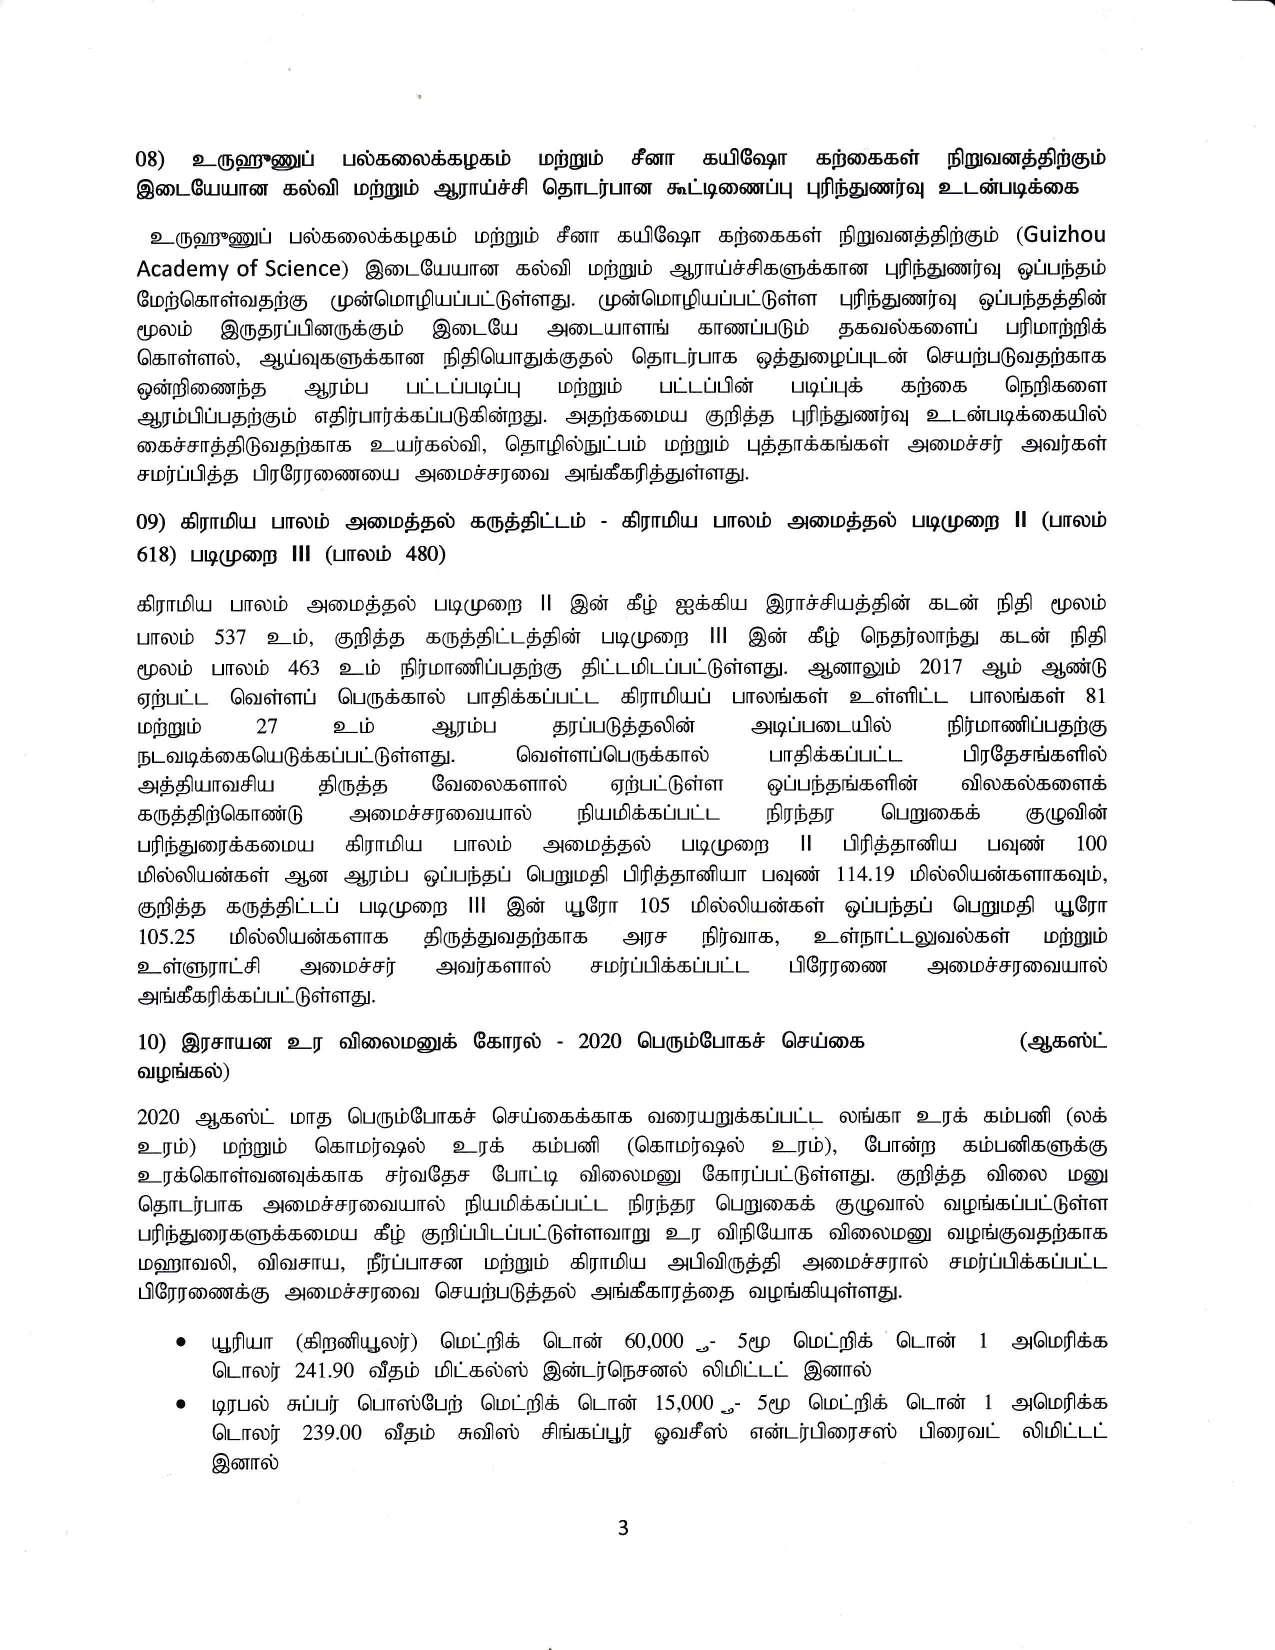 Cabinet Decision on 08.07.2020 TAMIL page 003